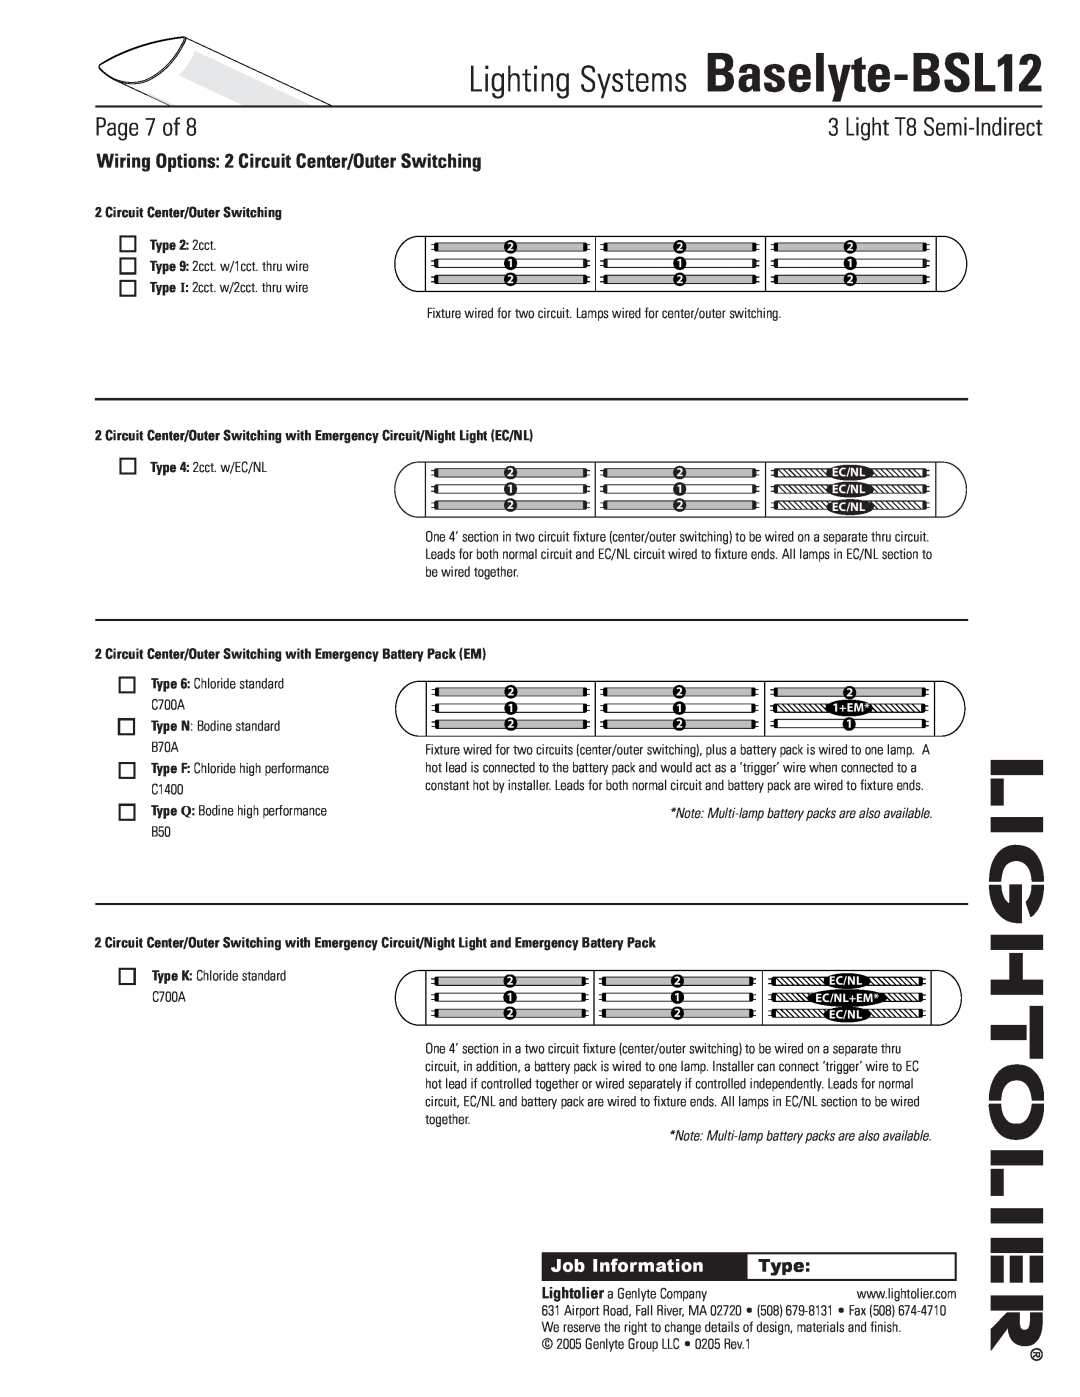 Lightolier Baselyte-BSL12 Wiring Options 2 Circuit Center/Outer Switching, Circuit Center/Outer Switching Type 2 2cct 